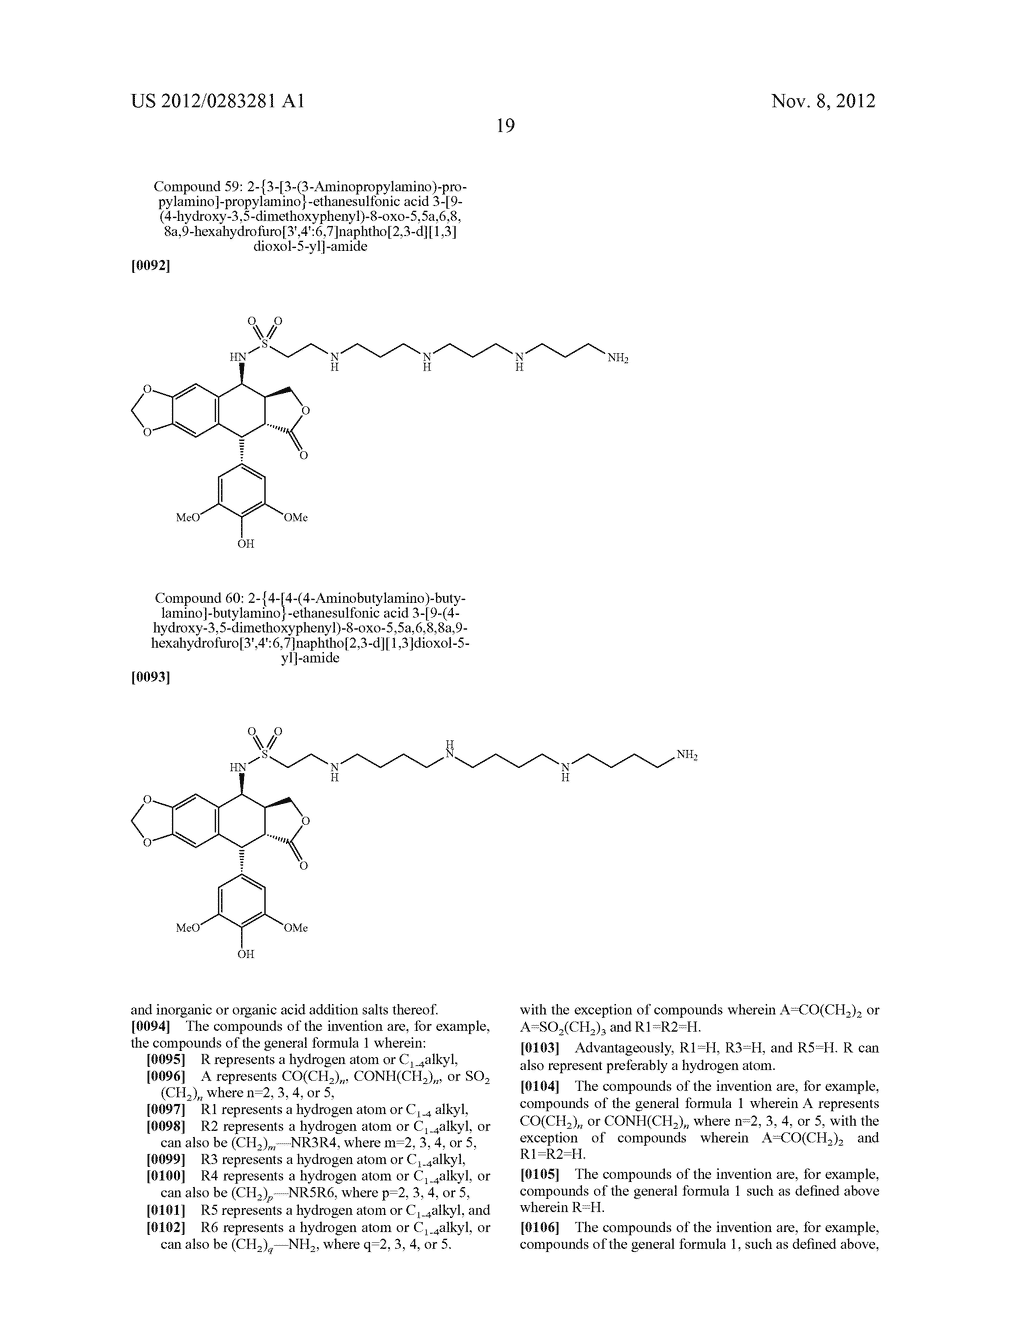 NEW (POLY)AMINOALKYLAMINOALKYLAMIDE, ALKYL-UREA, OR ALKYL-SULFONAMIDE     DERIVATIVES OF EPIPODOPHYLLOTOXIN, A PROCESS FOR PREPARING THEM, AND     APPLICATION THEREOF IN THERAPY AS ANTICANCER AGENTS - diagram, schematic, and image 20